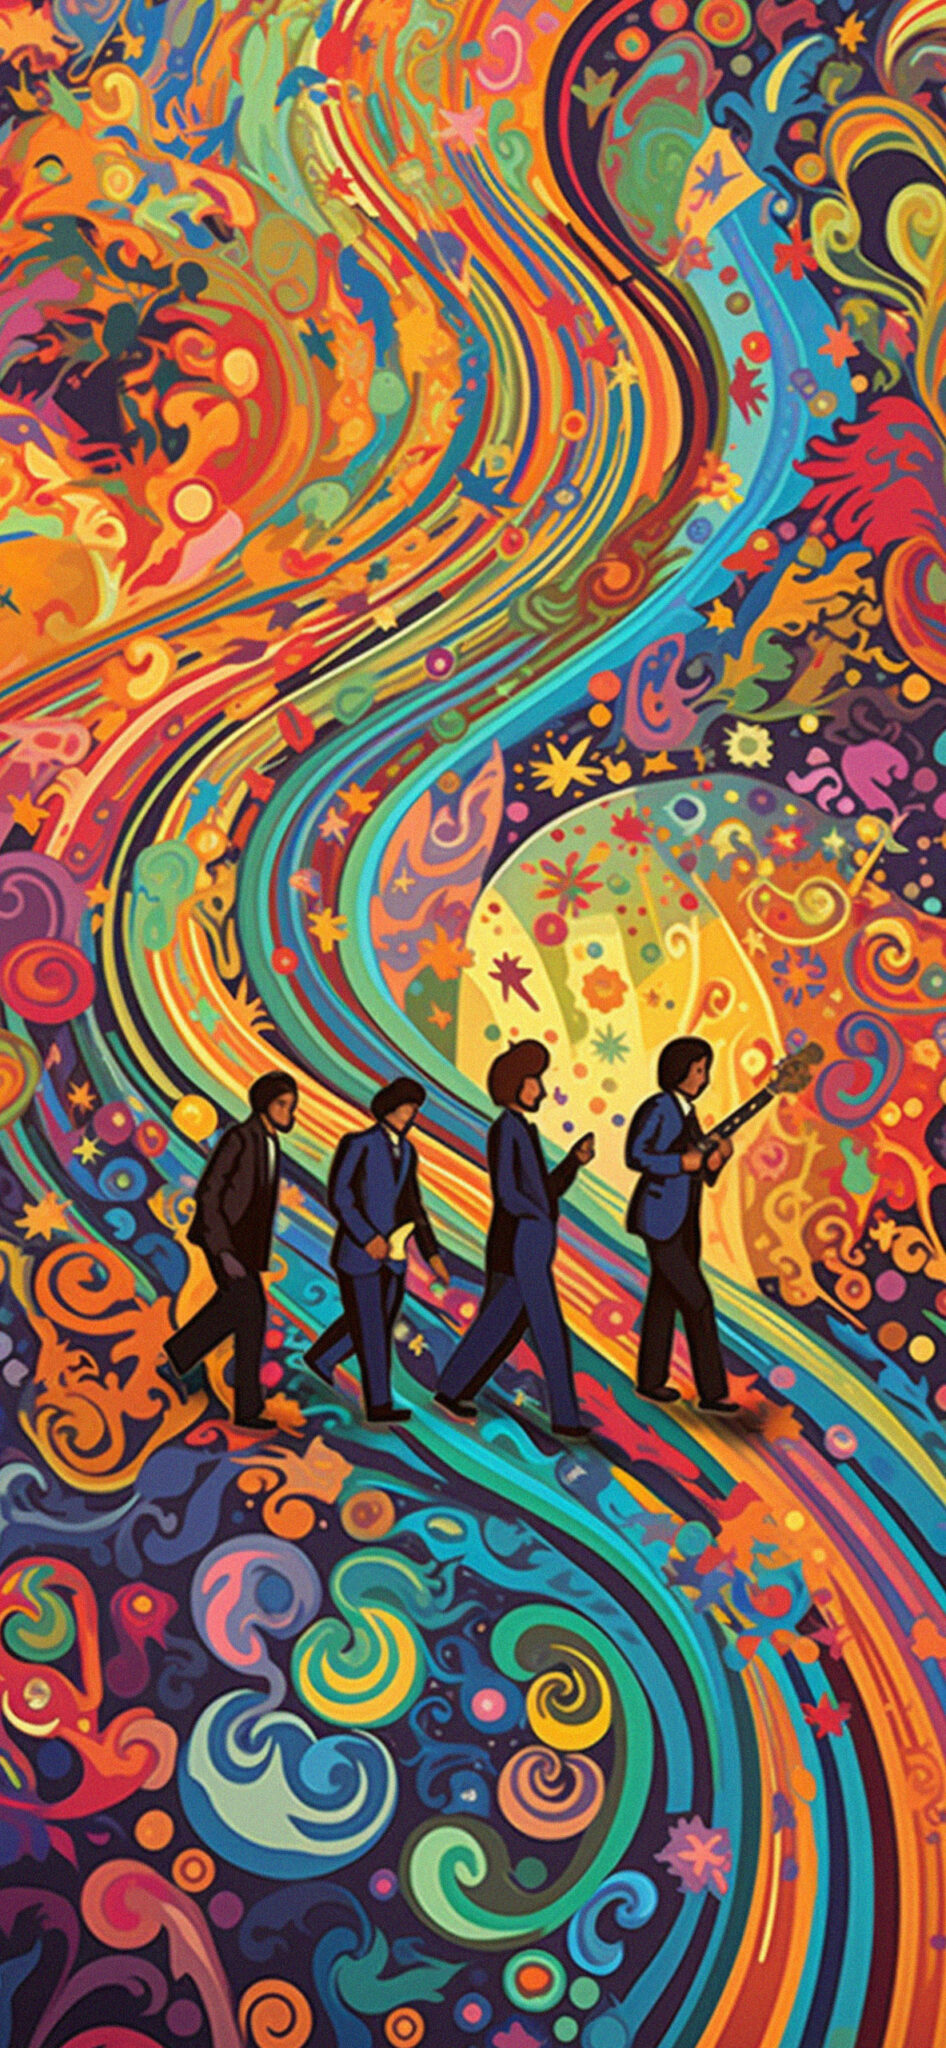 The Beatles Psychedelic Art Wallpapers - Free Trippy Wallpapers